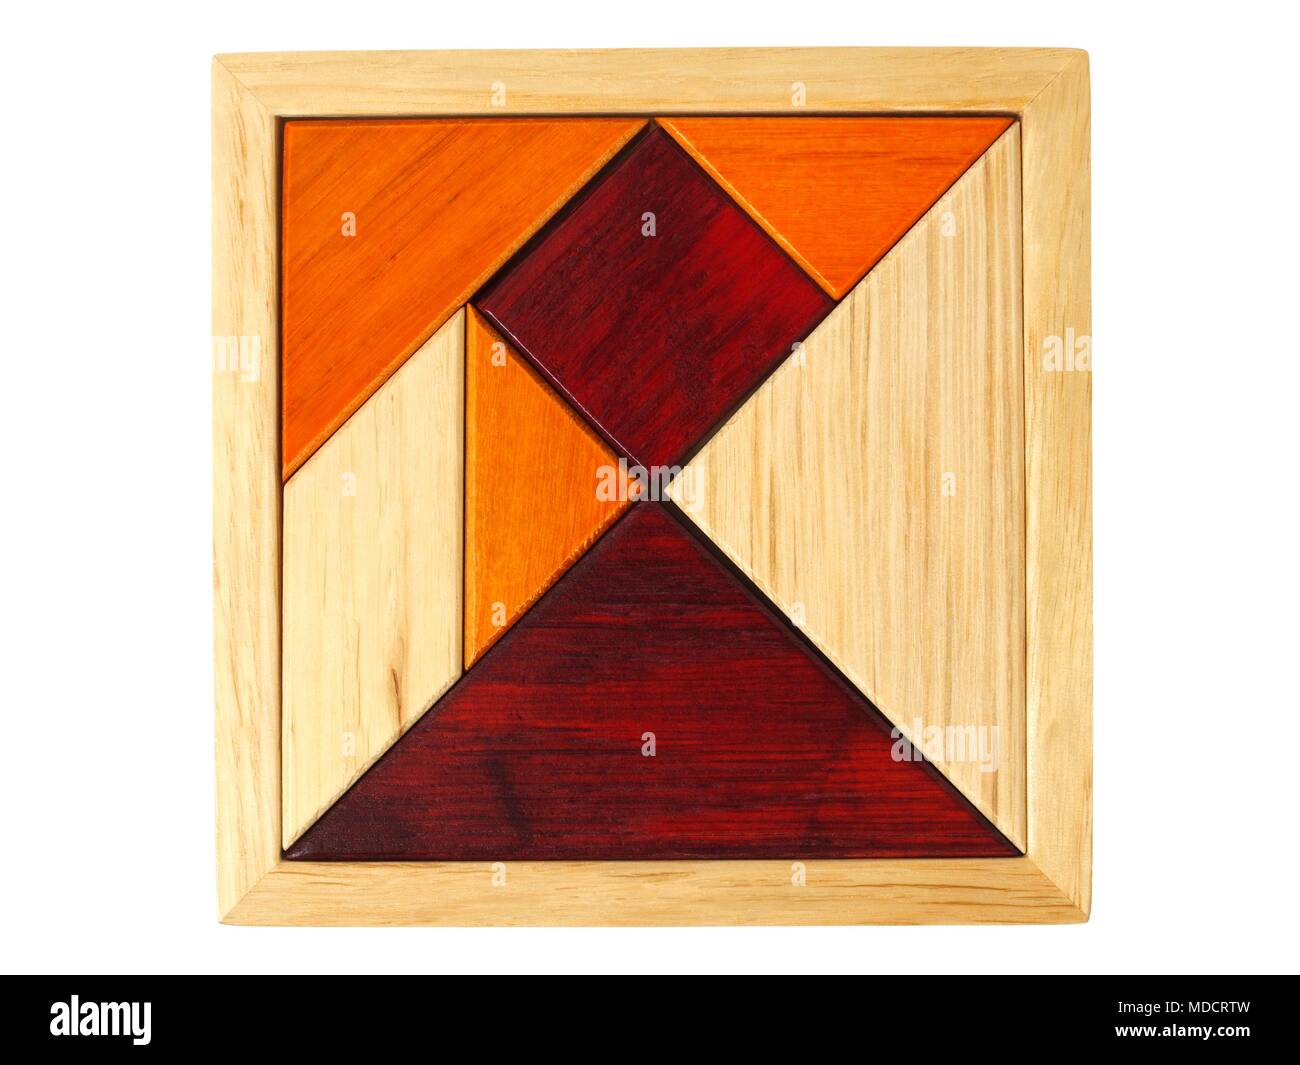 Square shape made from tangram in a wooden box Stock Photo